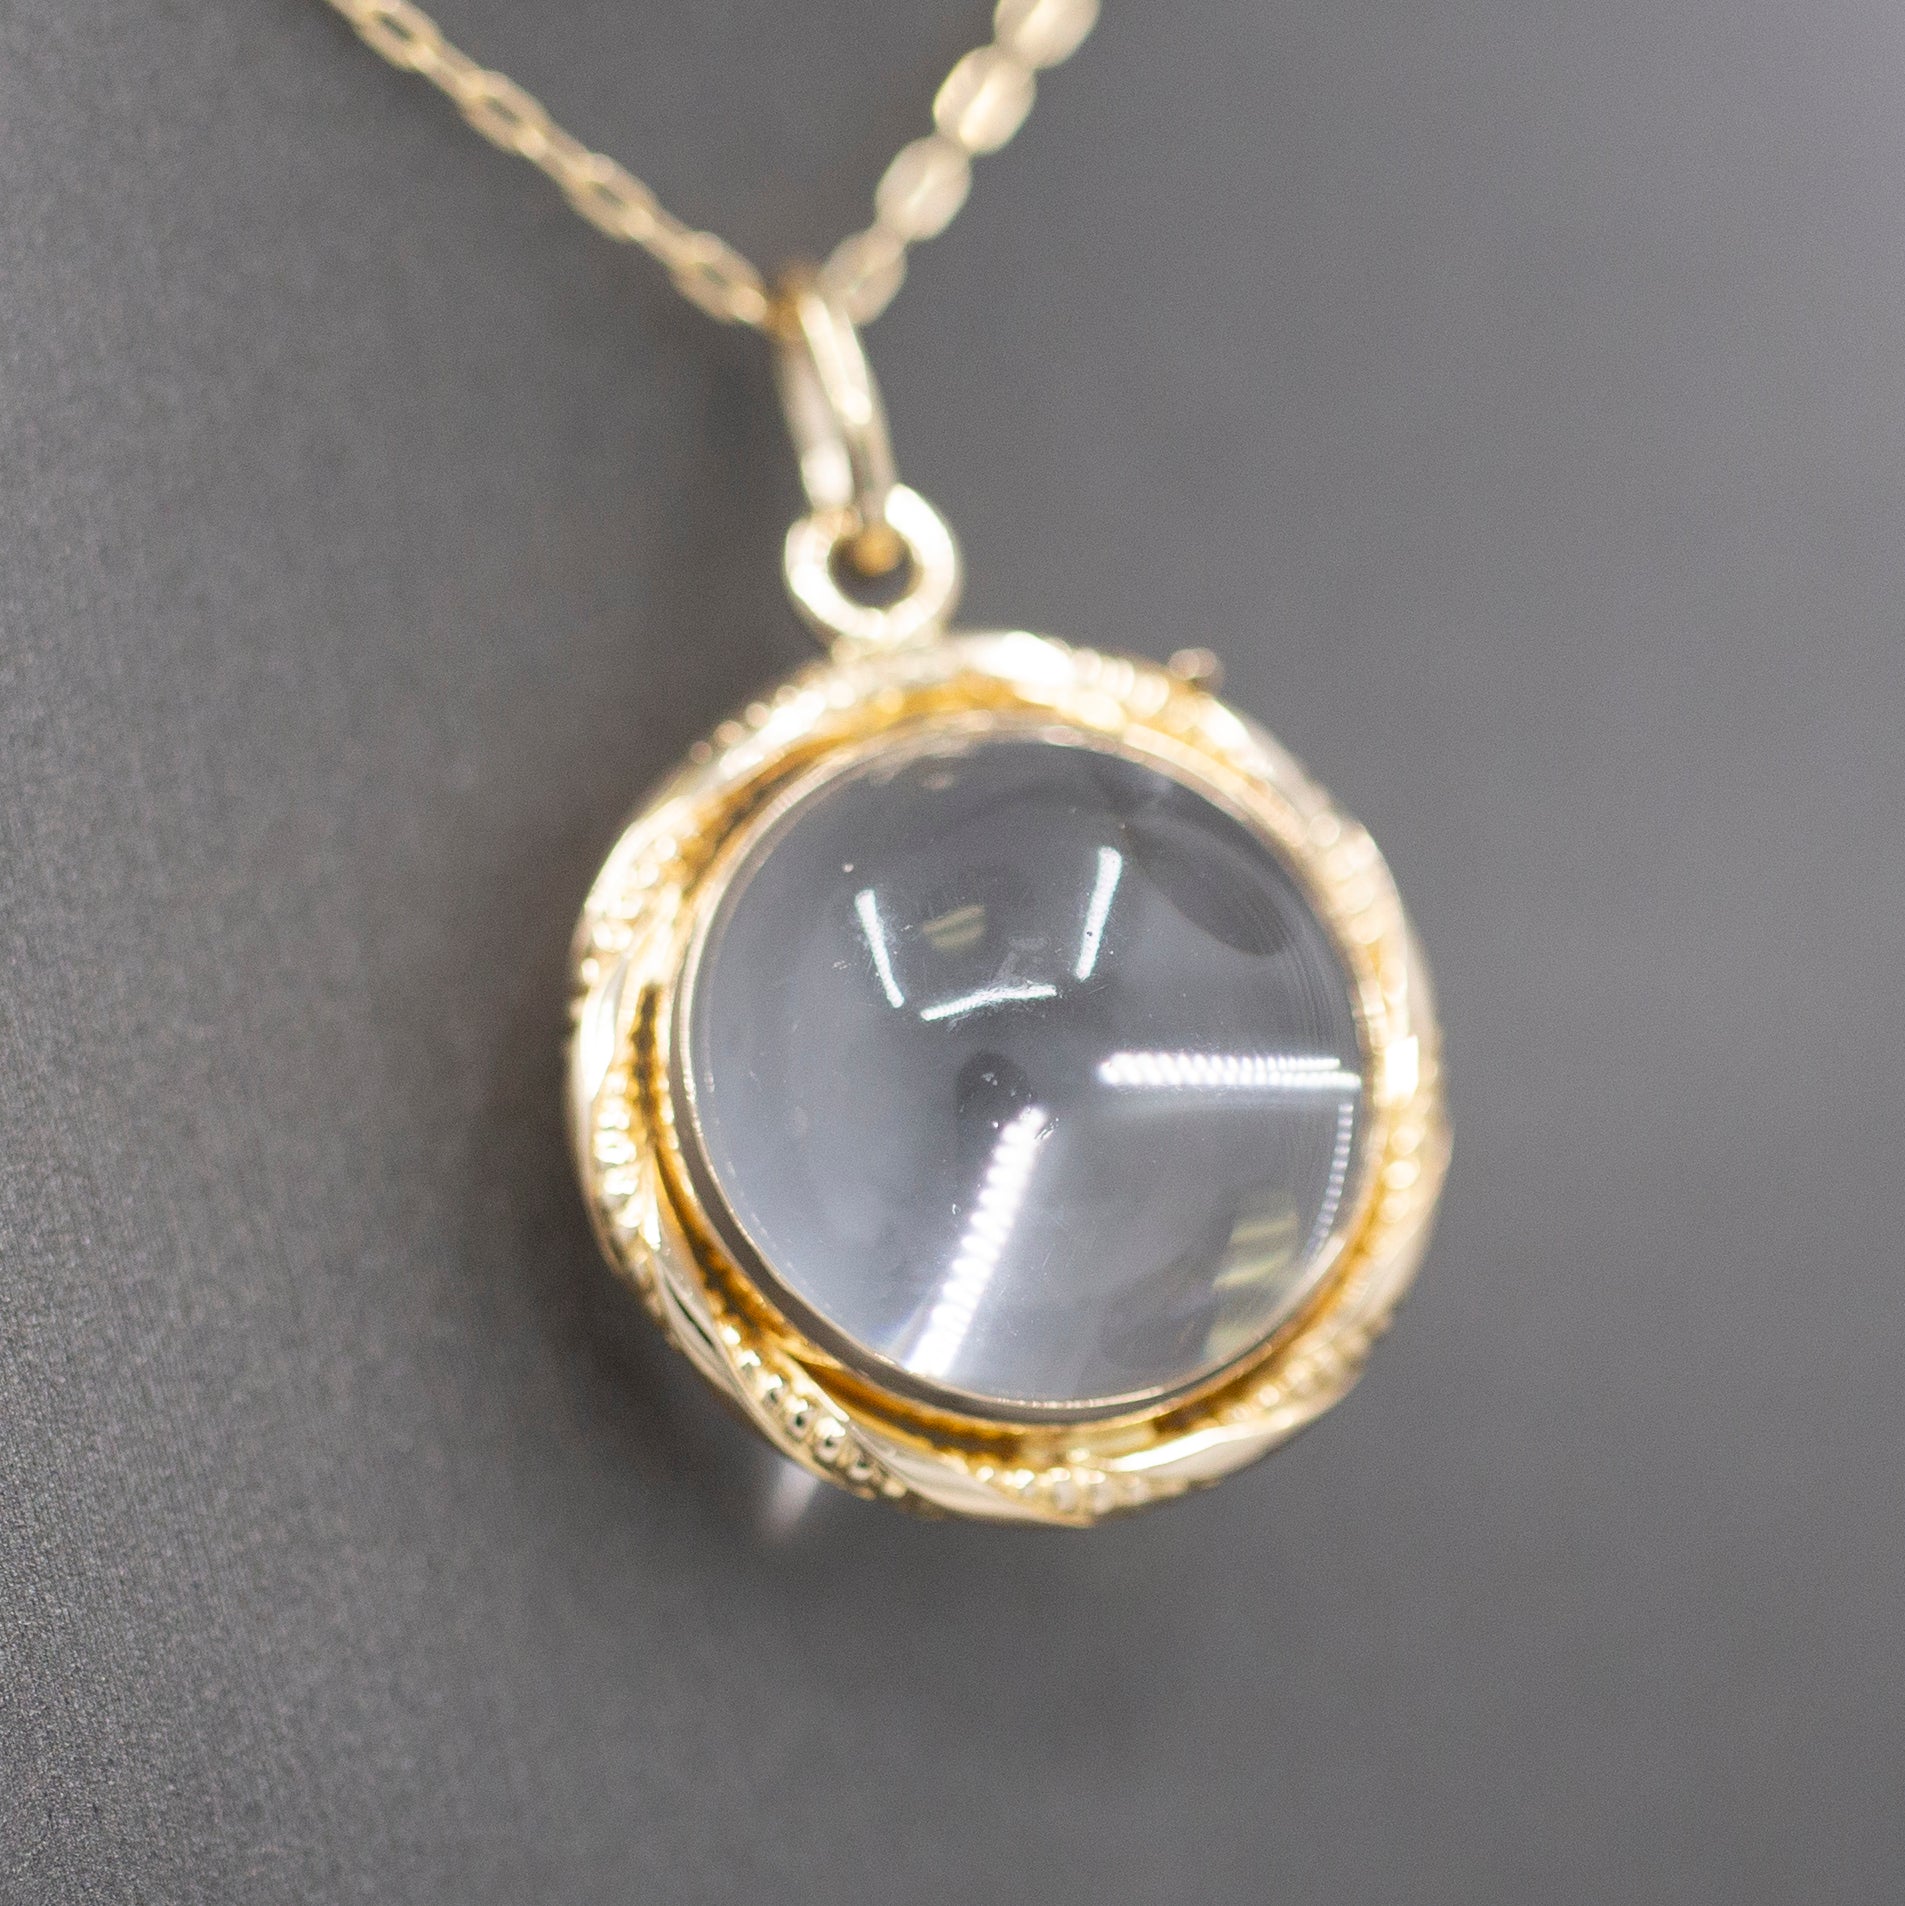 Antique Victorian Pools of Light Double Sided Rock Crystal Quartz Locket in 14k Yellow GoldAntique Victorian Pools of Light Double Sided Rock Crystal Quartz Locket in 14k Yellow Gold